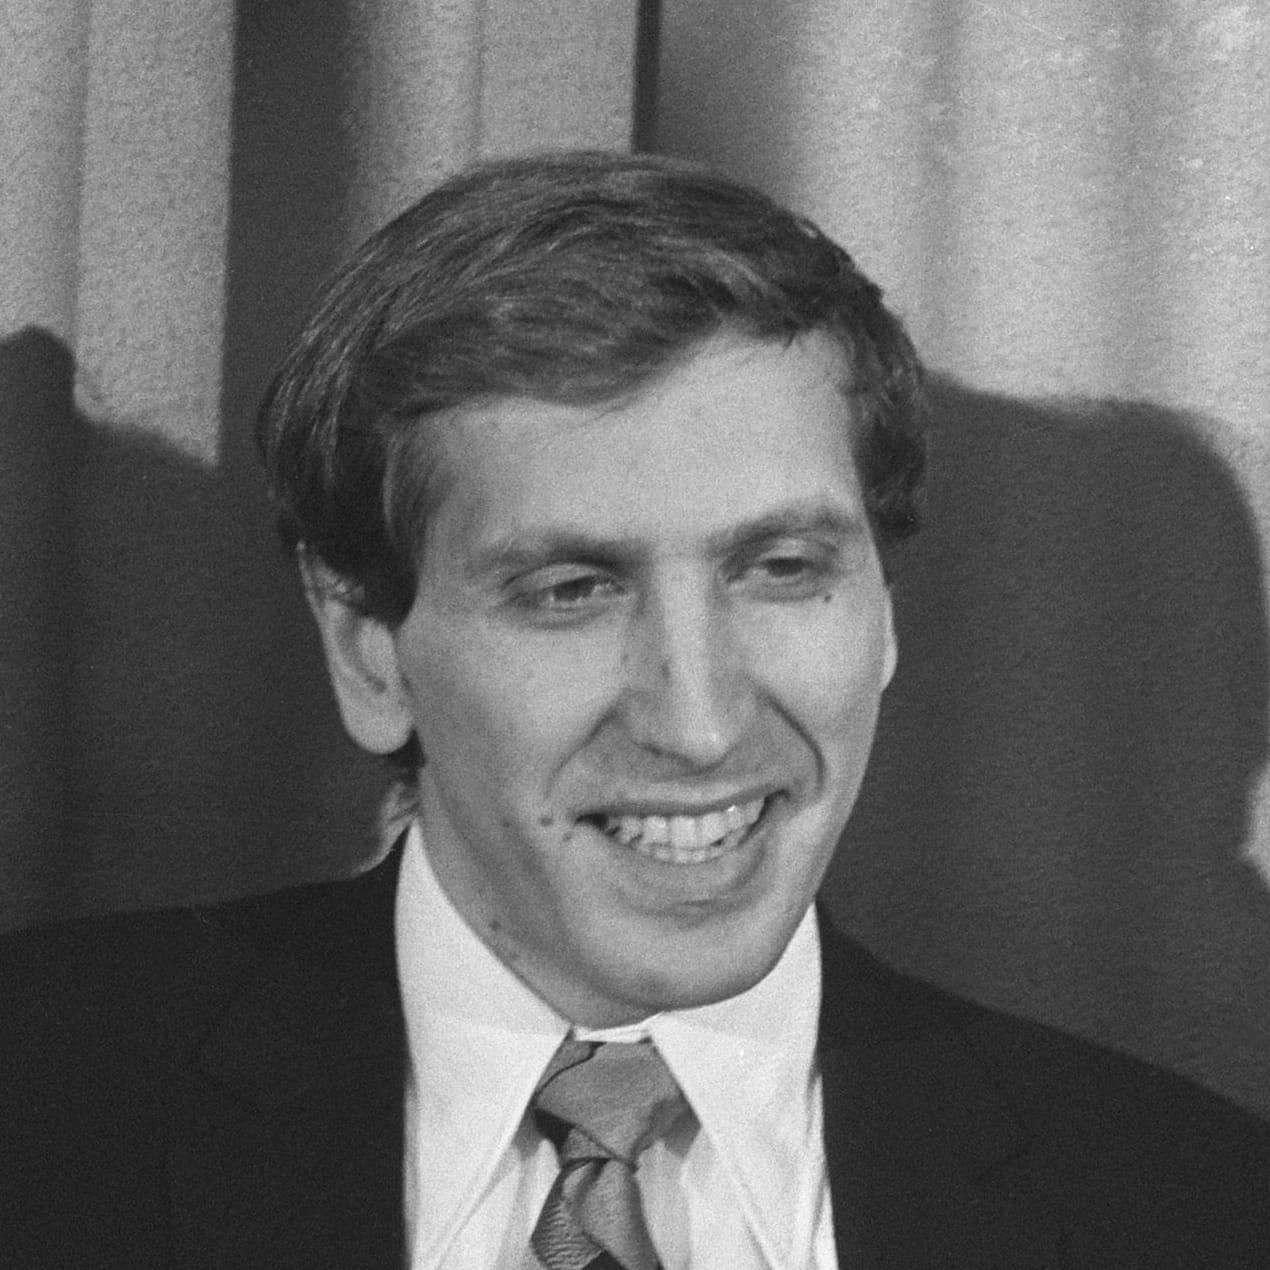 Bobby Fischer: Black and white magic, Documentary films